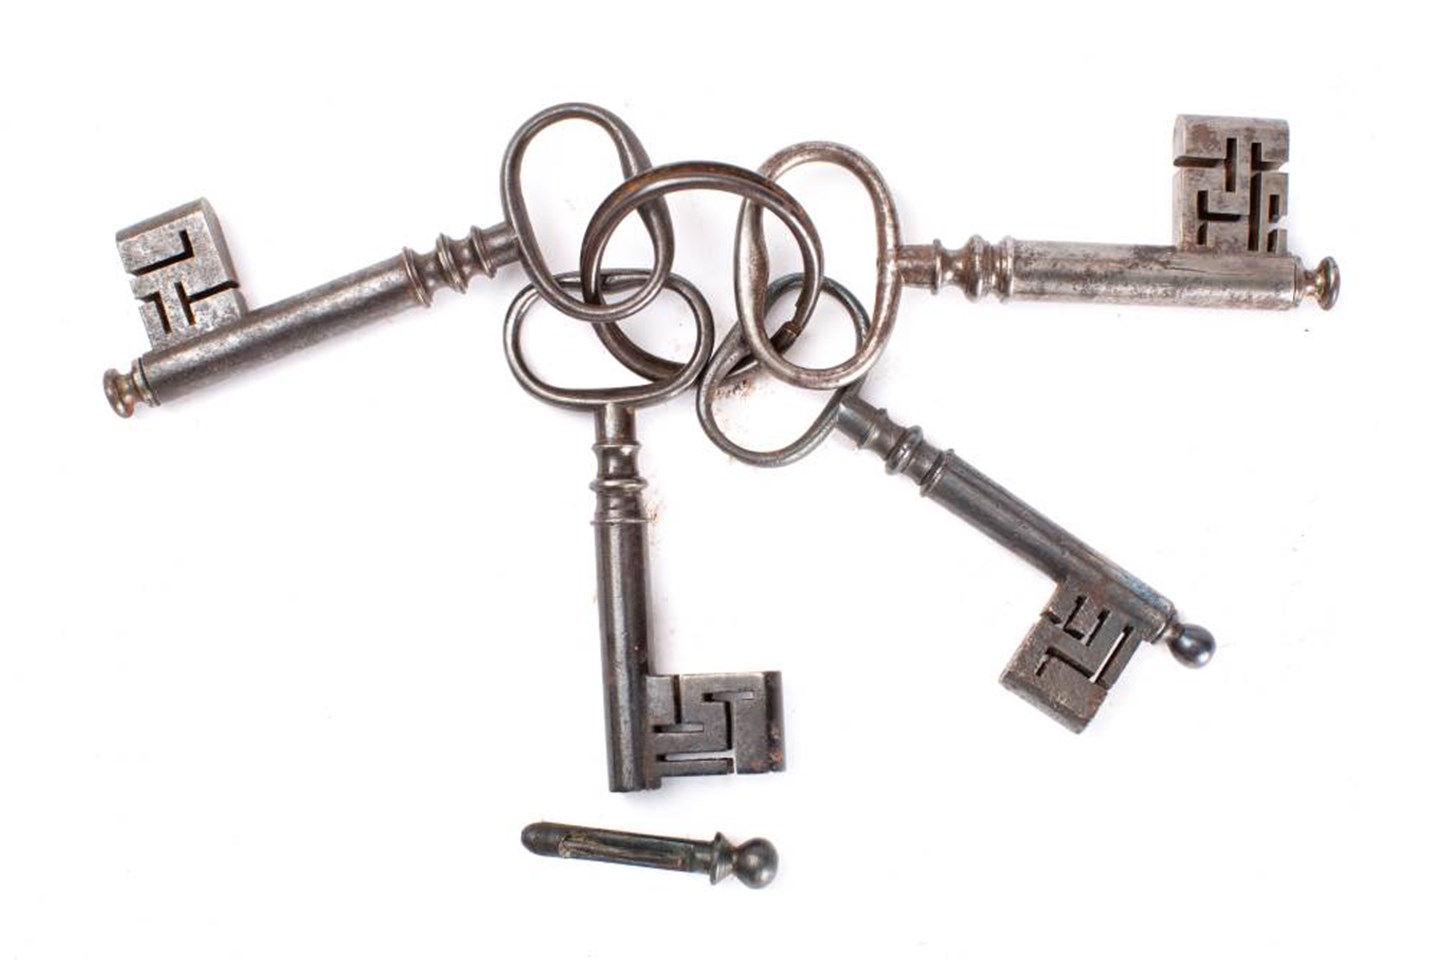 Four 18th century English steel keys with dust caps (spigots):